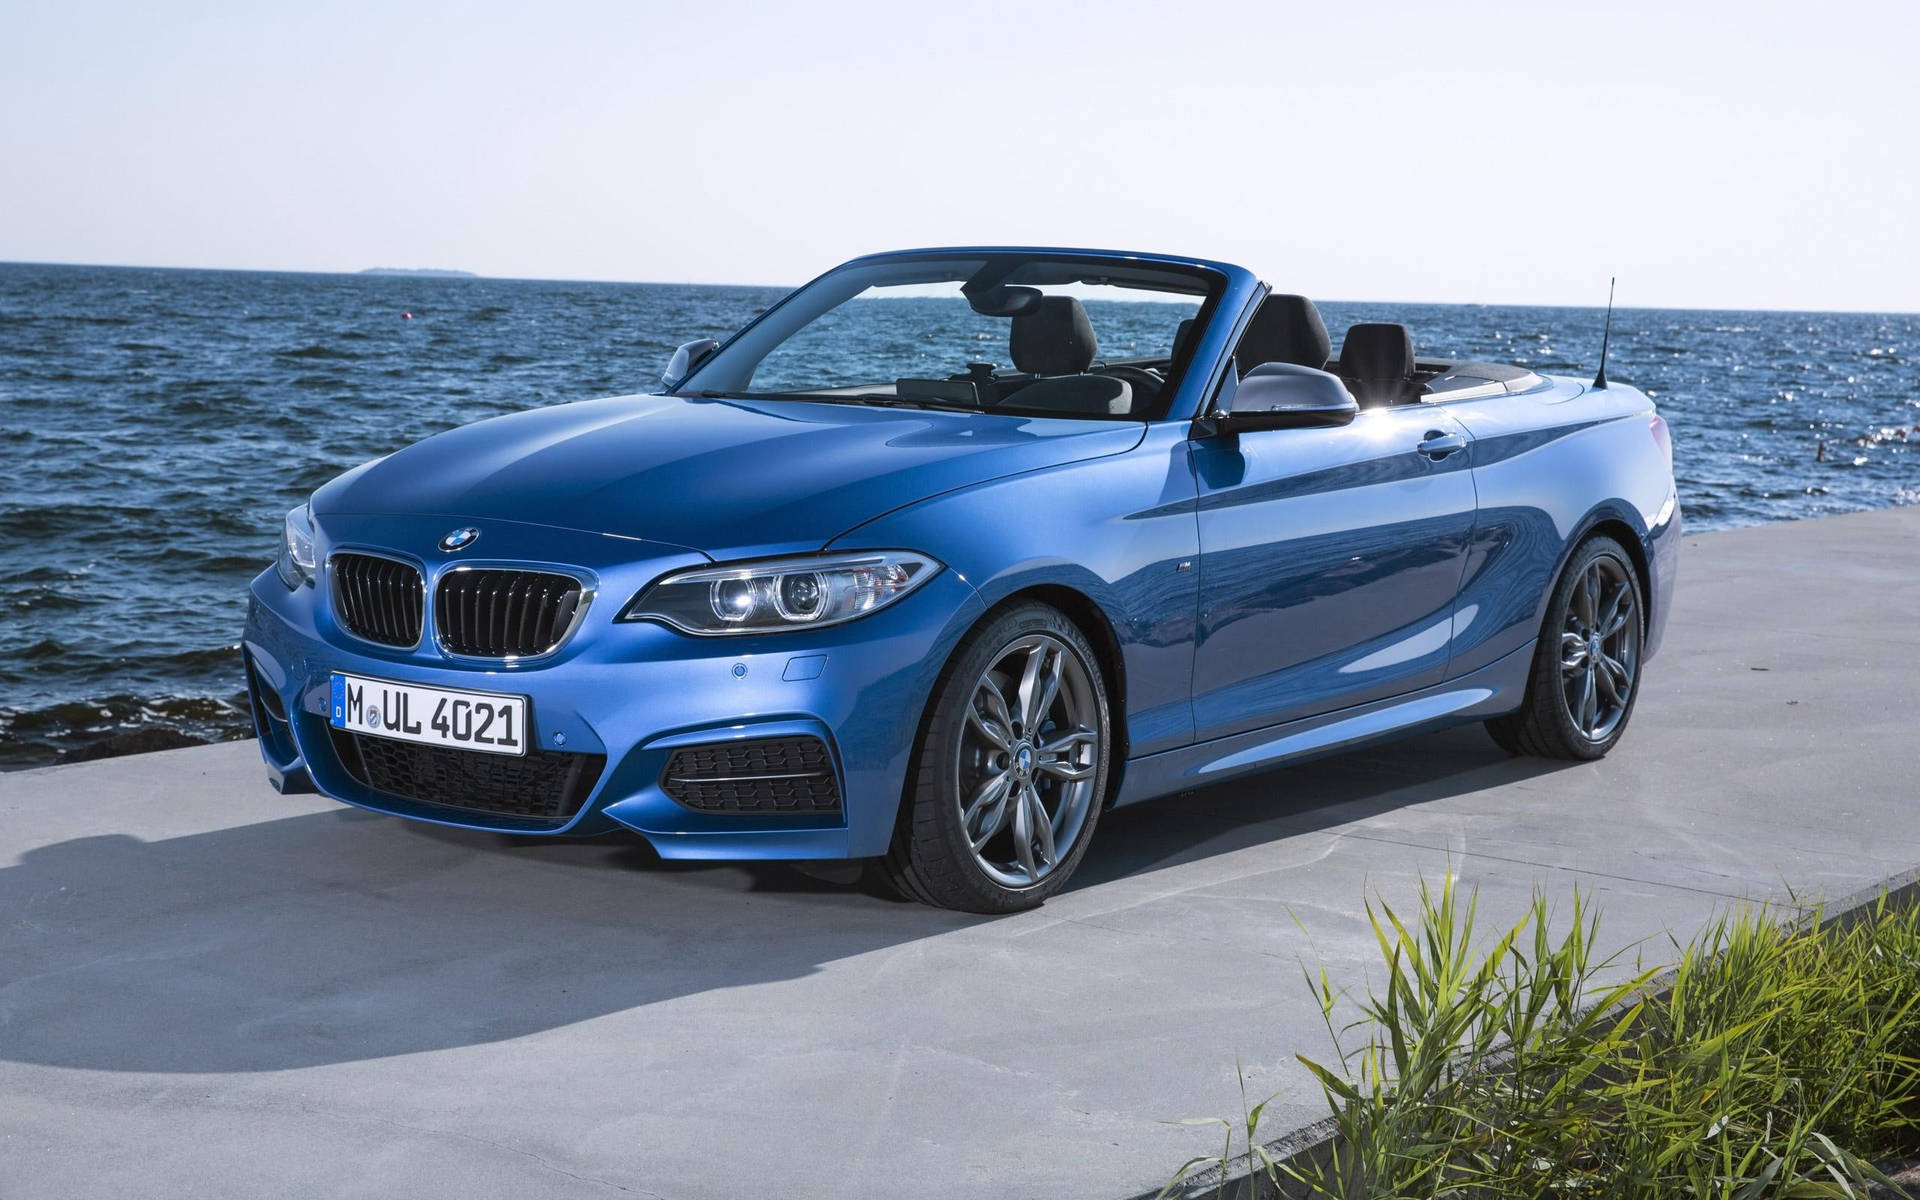 The 2023 Bmw M4 Luxury Sports Car Showcasing Its Sleek Design And Muscular Stance. Background